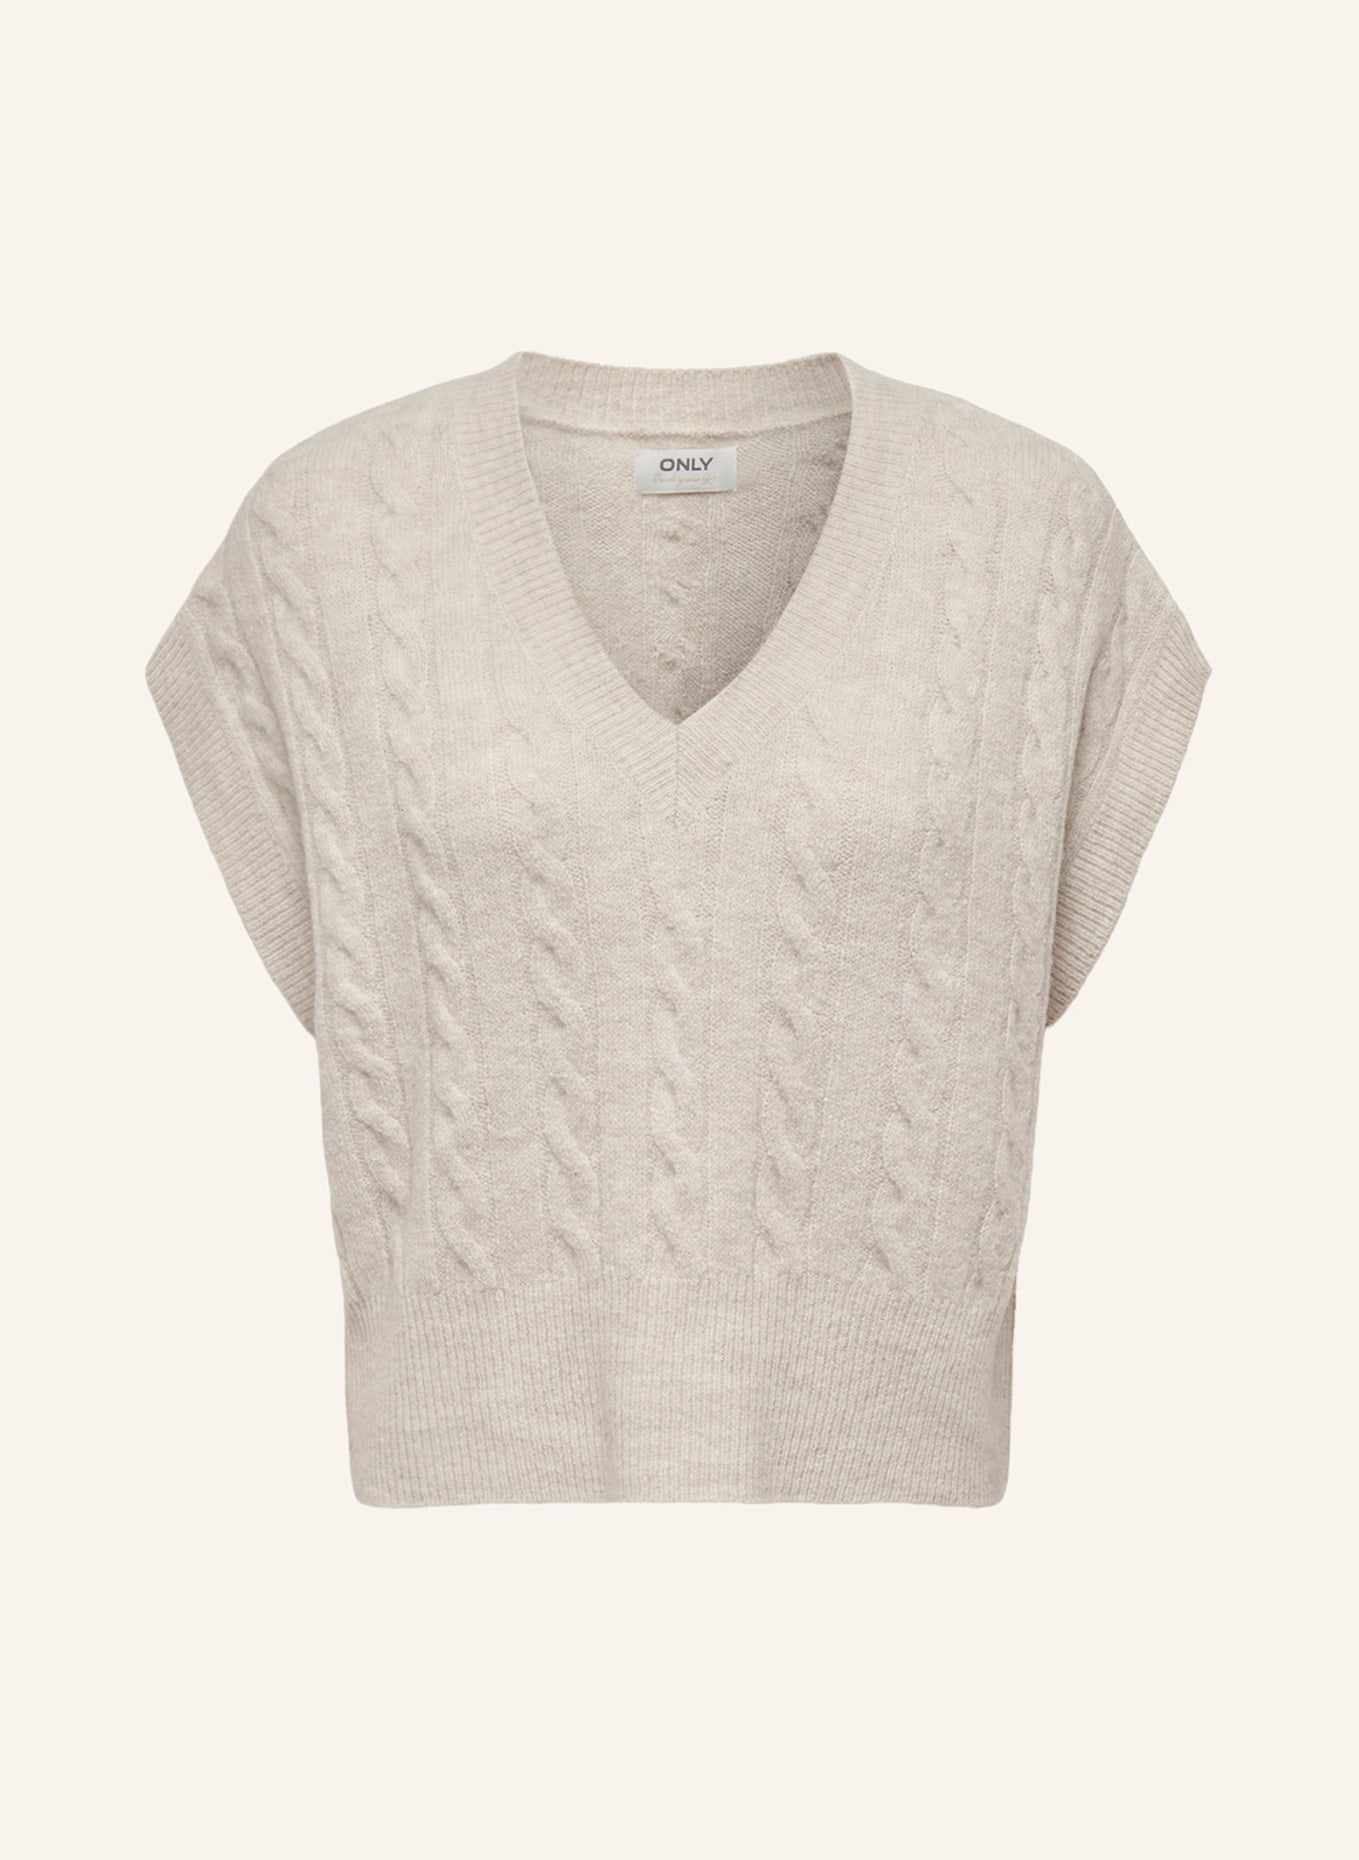 ONLY Sweater vest, Color: CREAM (Image 1)